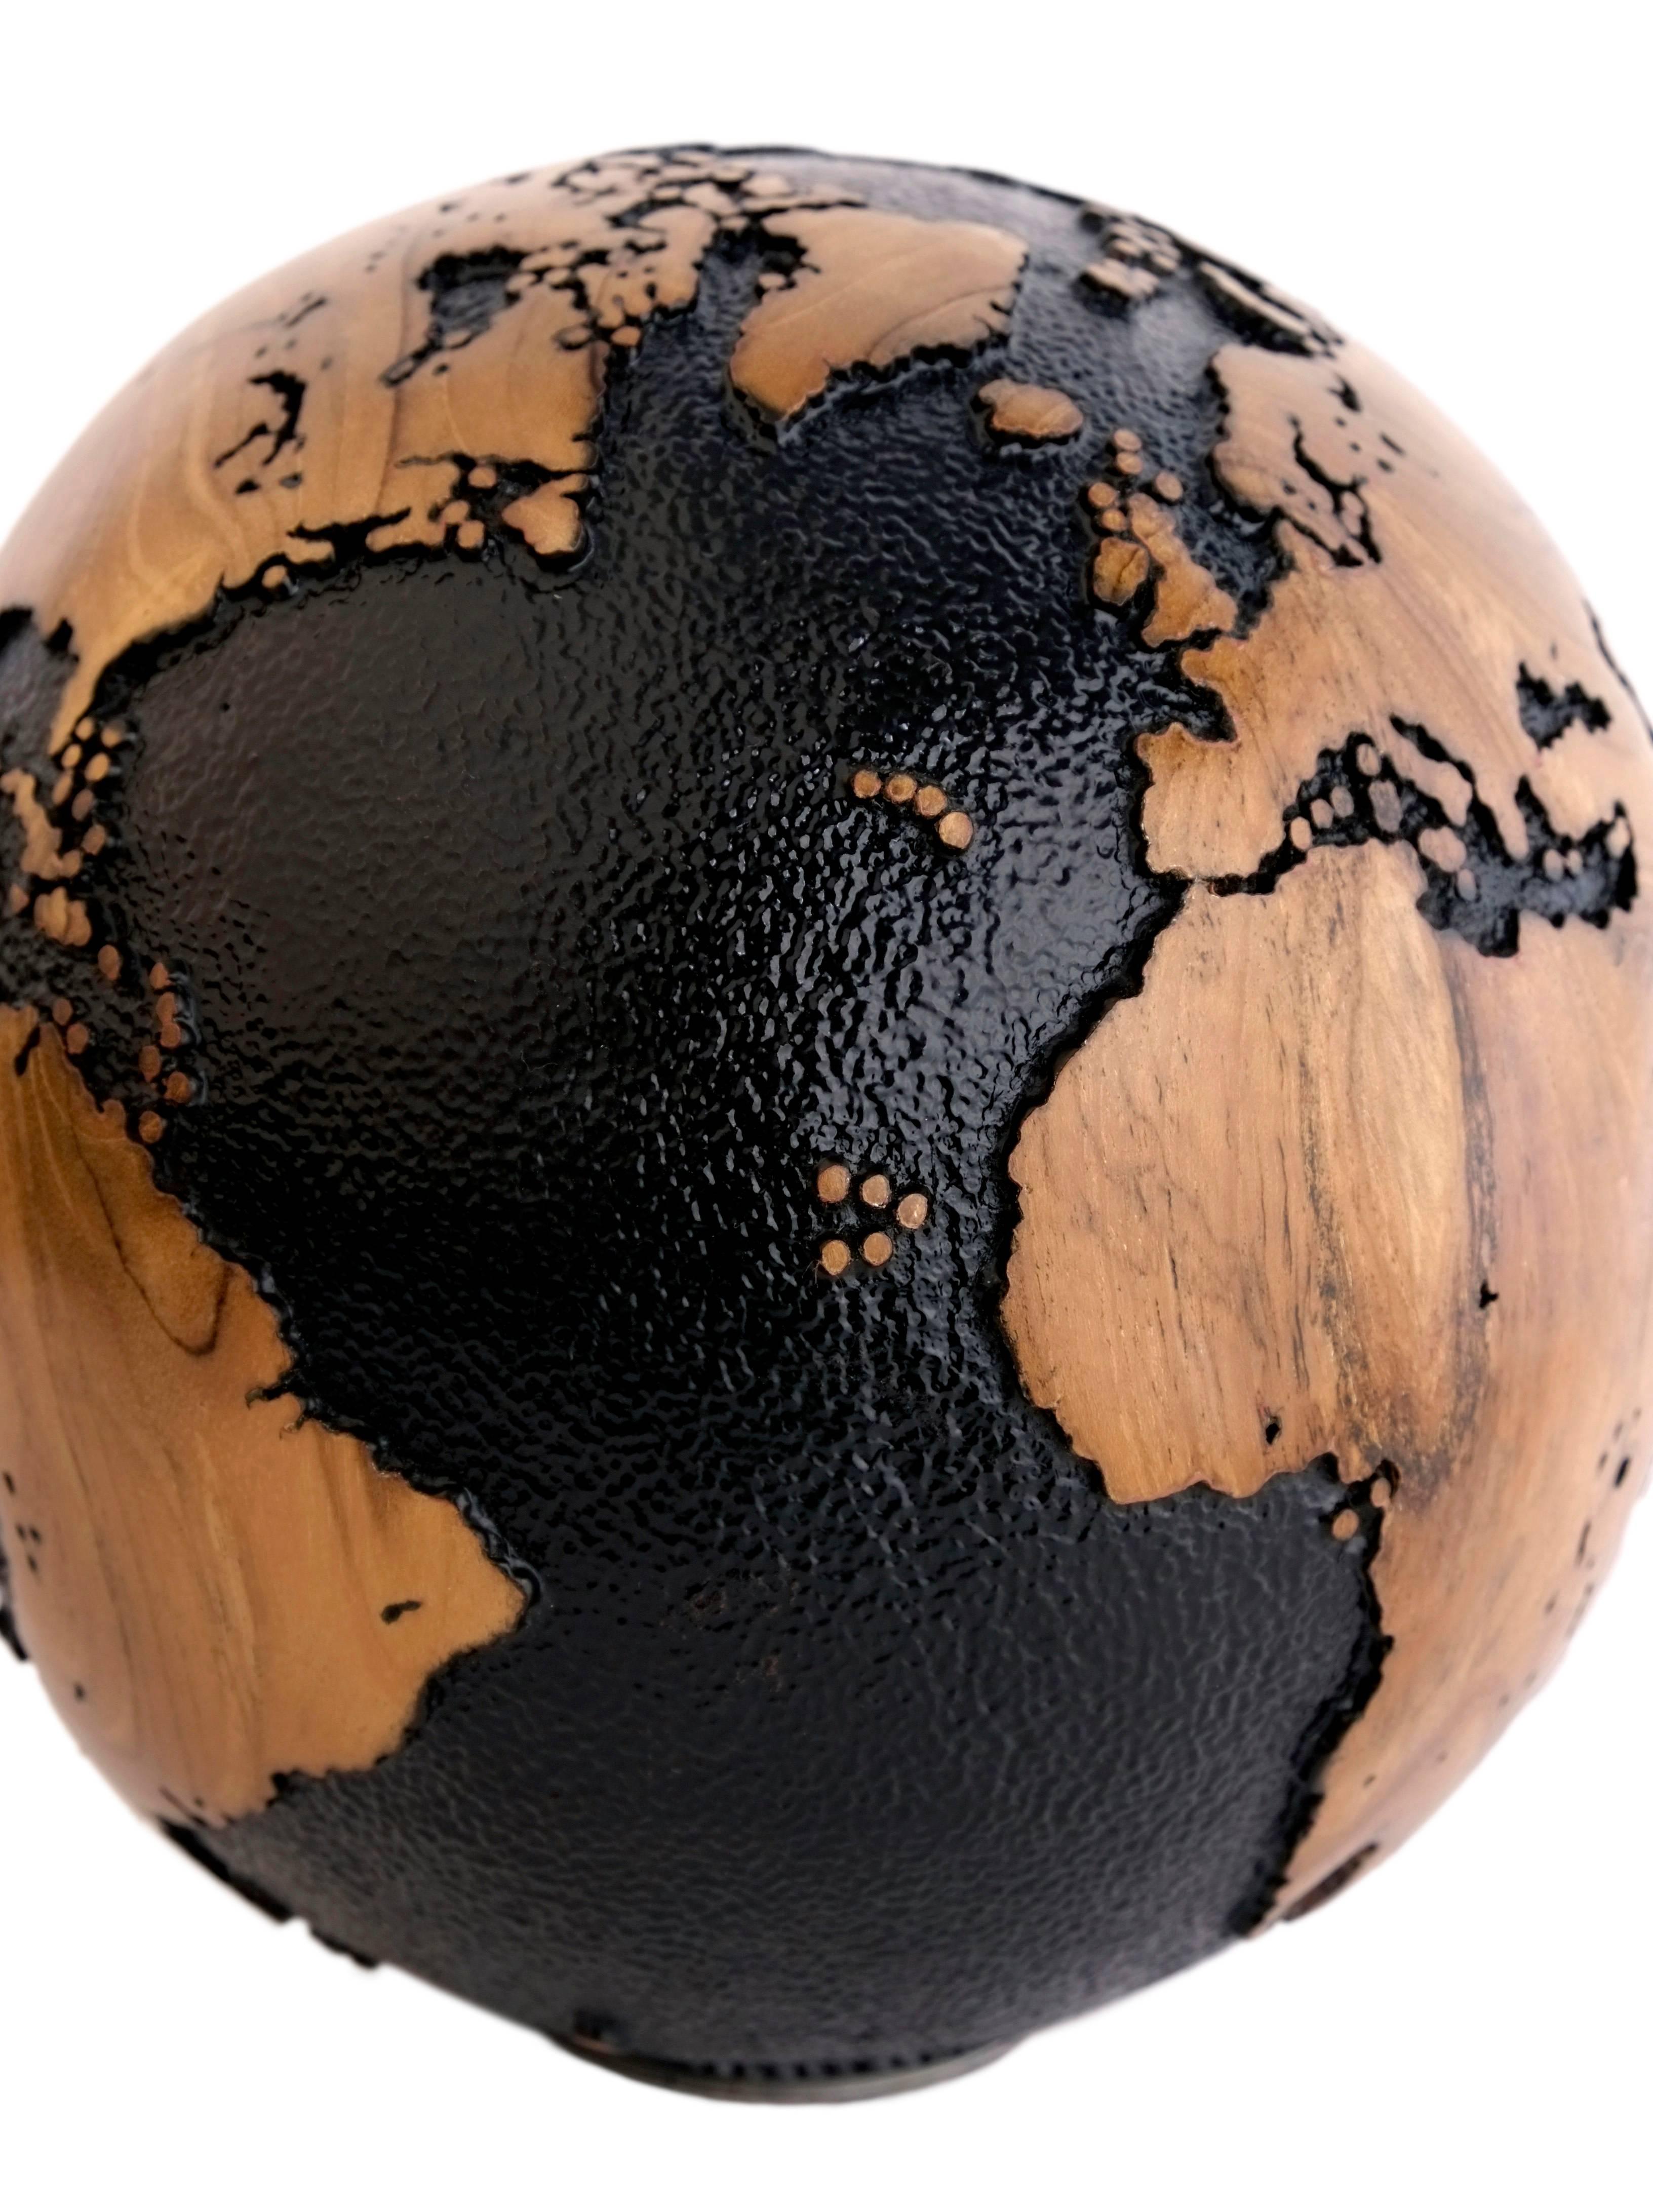 Contemporary Superb Black Beauty Wooden Globe with 79 Stainless Bolts, 20 cm, Saturday Sale For Sale